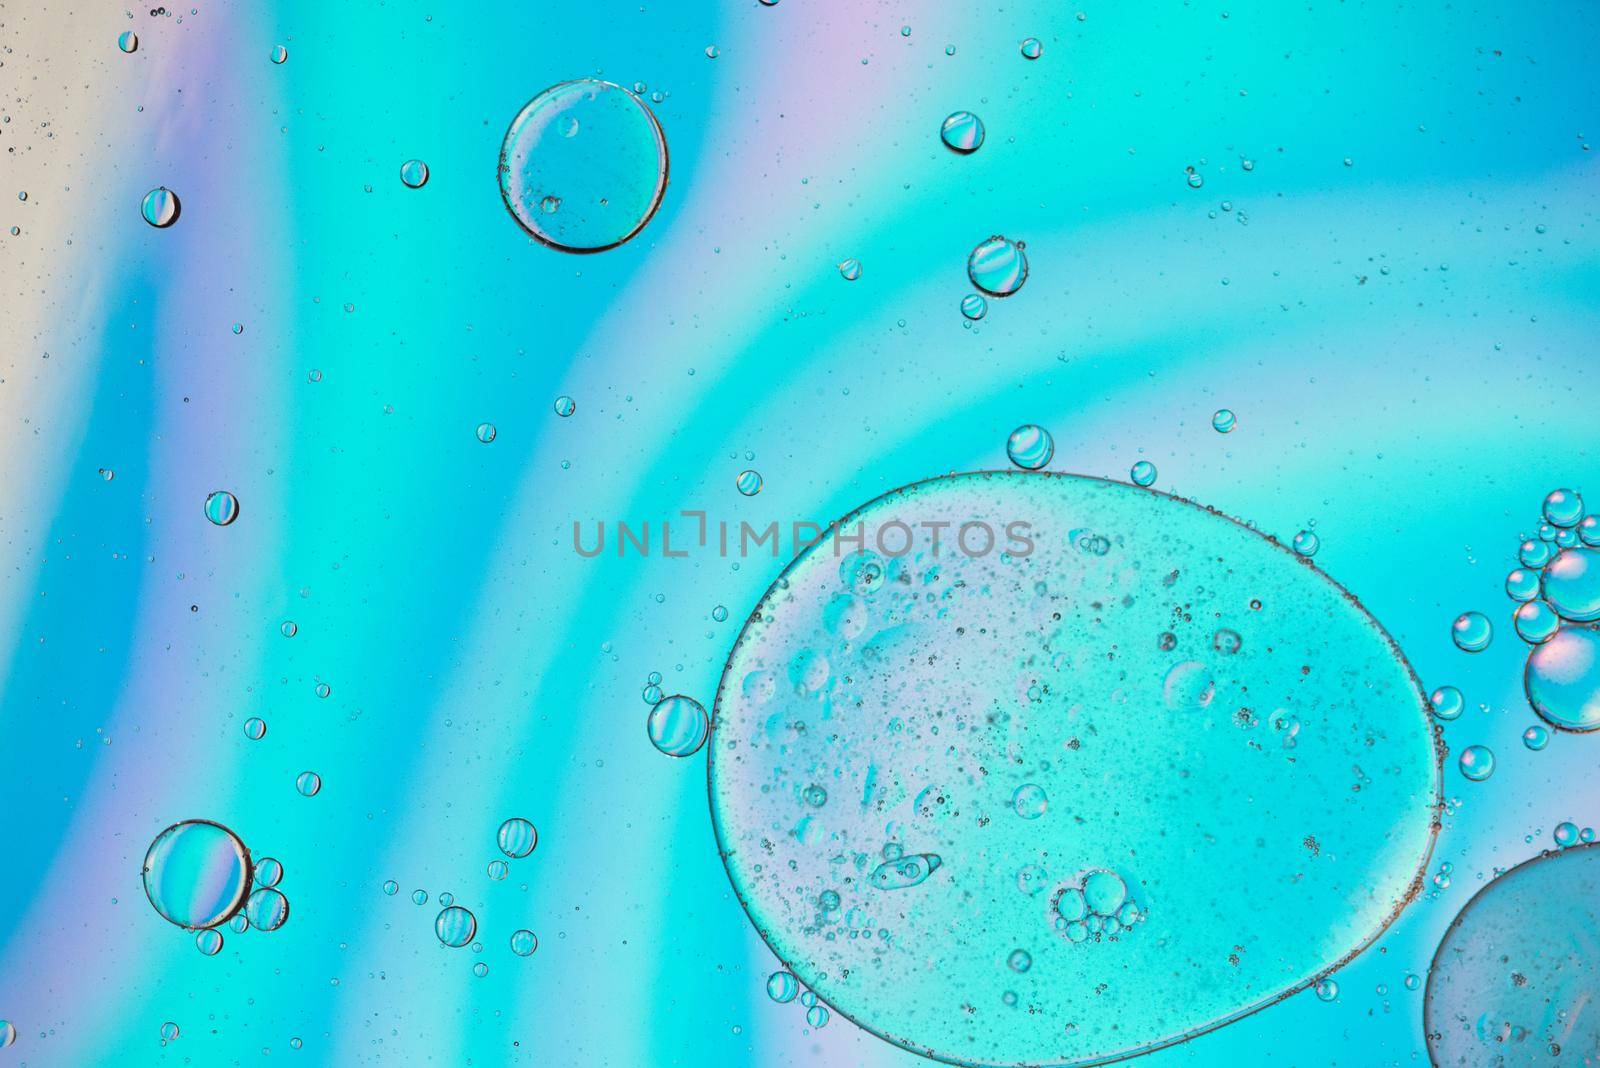 Holographic colorful abstract background with oil drops on water by anytka